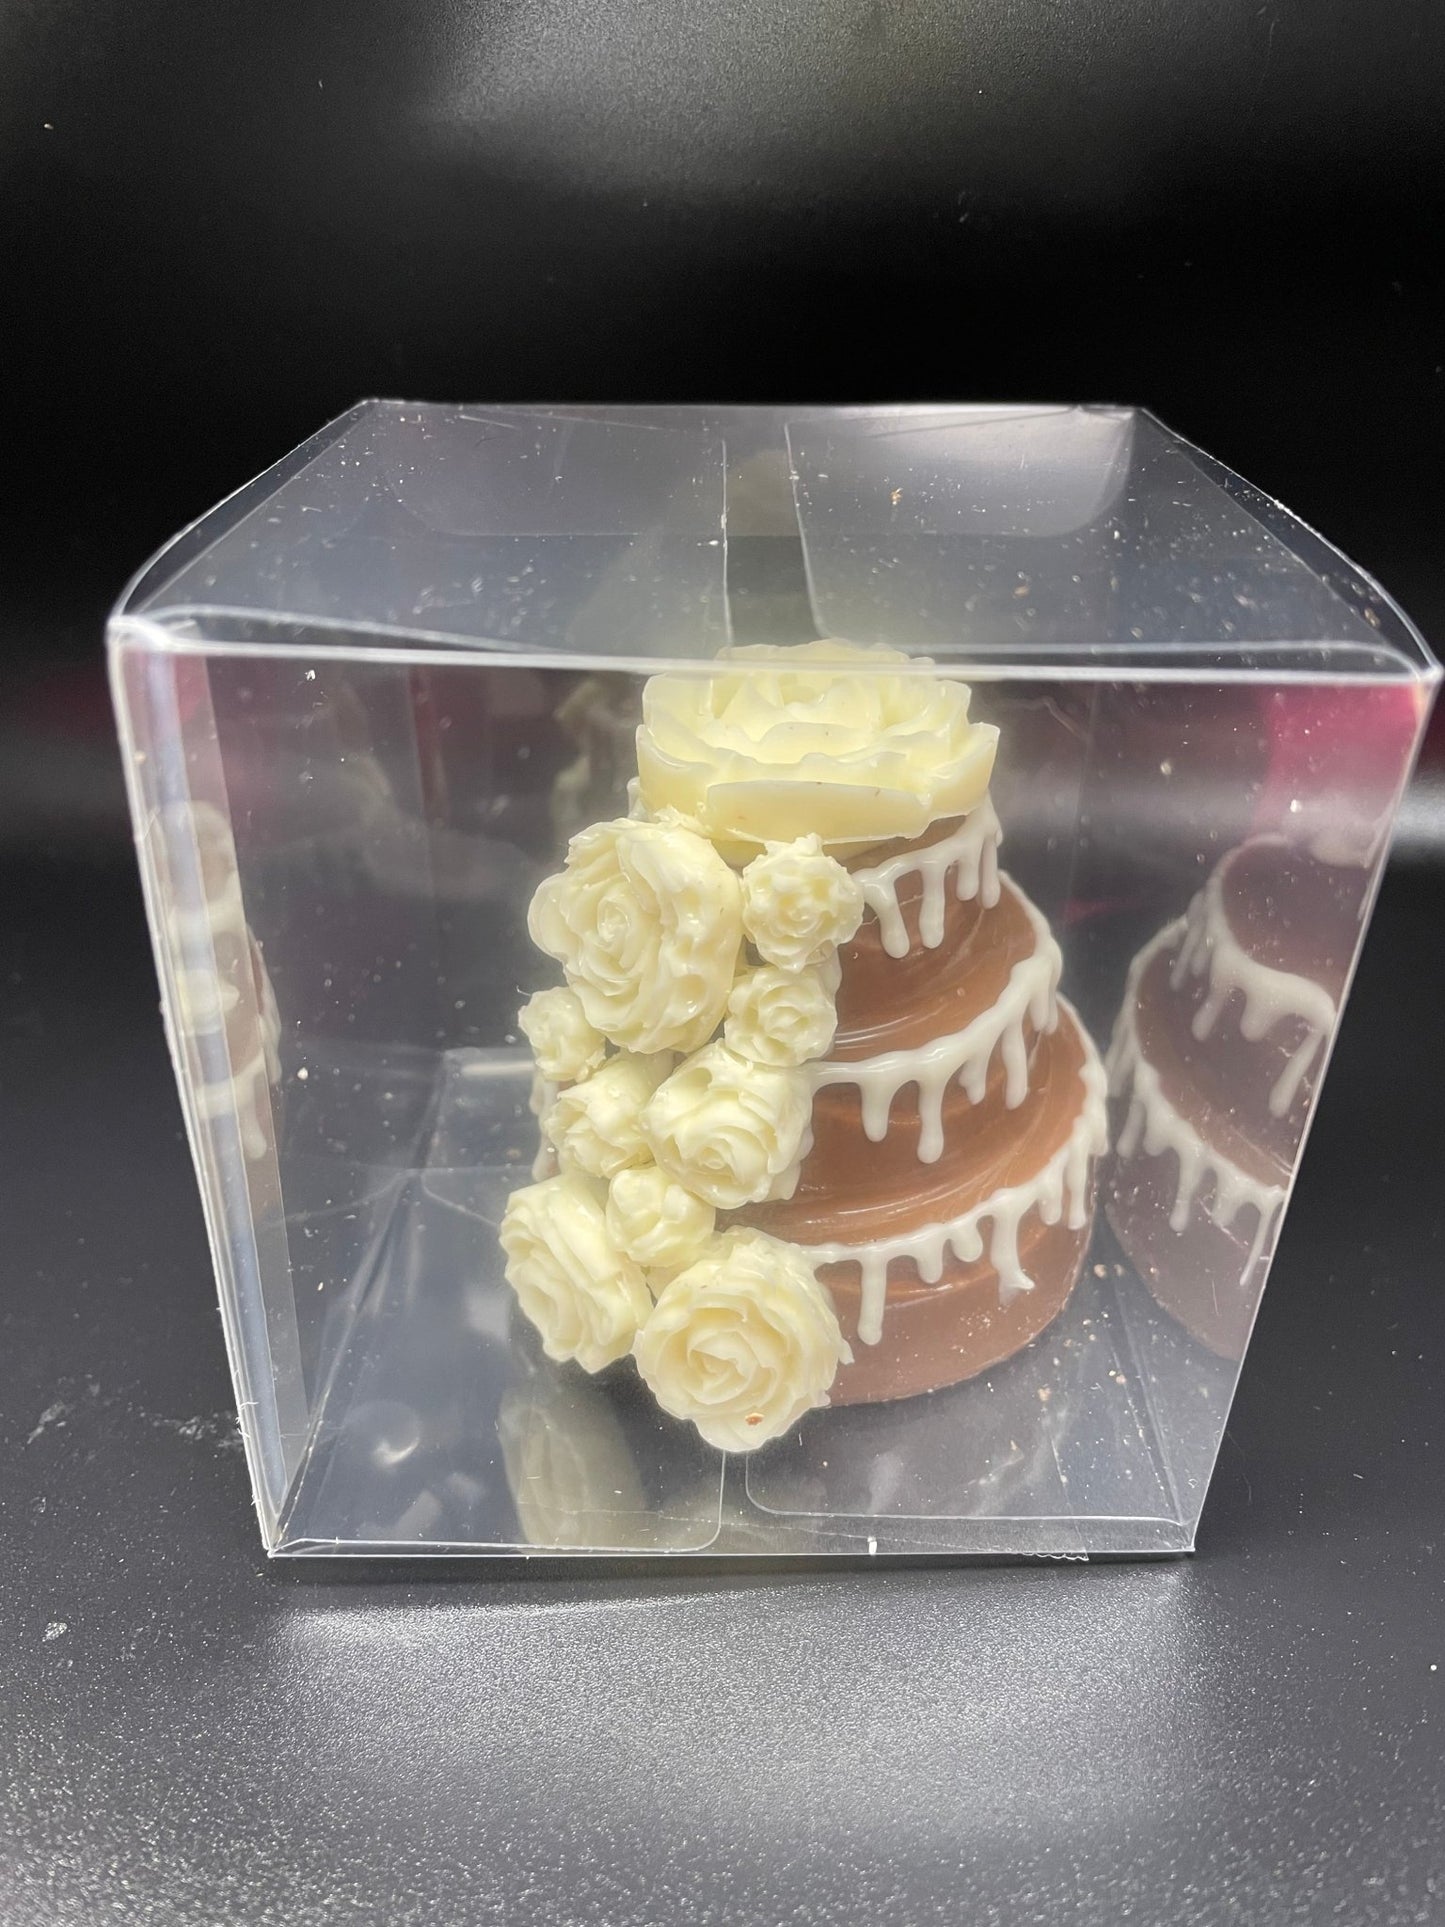 Wedding Cake Favor/Gift - Sweeties Candy Cottage